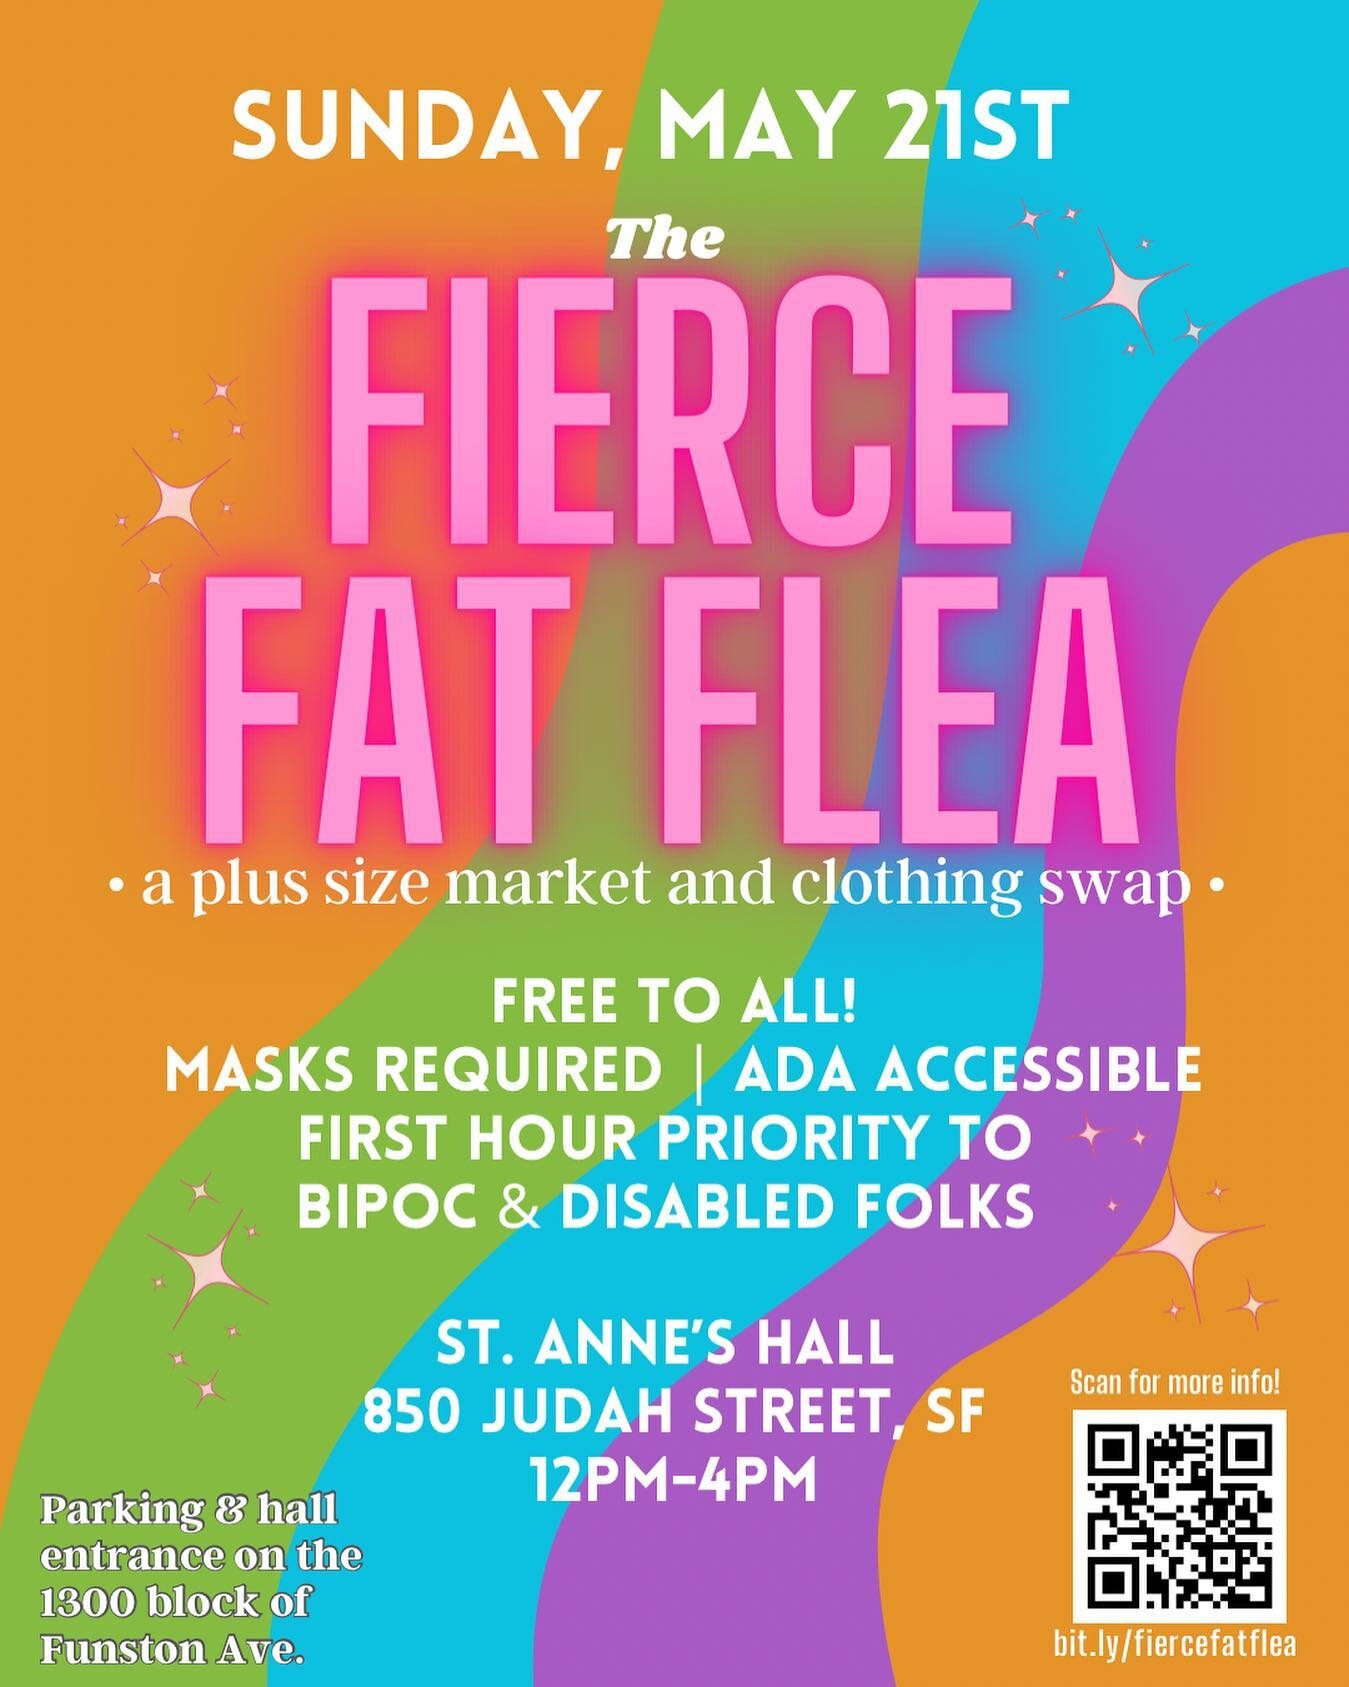 This Sunday - The first ever Fierce Fat Flea!

We&rsquo;ve got over twenty vendors, a donation based clothing swap, fat flash tattoos, and time spent with fat community! Come join us from 12-4pm in San Francisco! 

Masks are required to protect each 